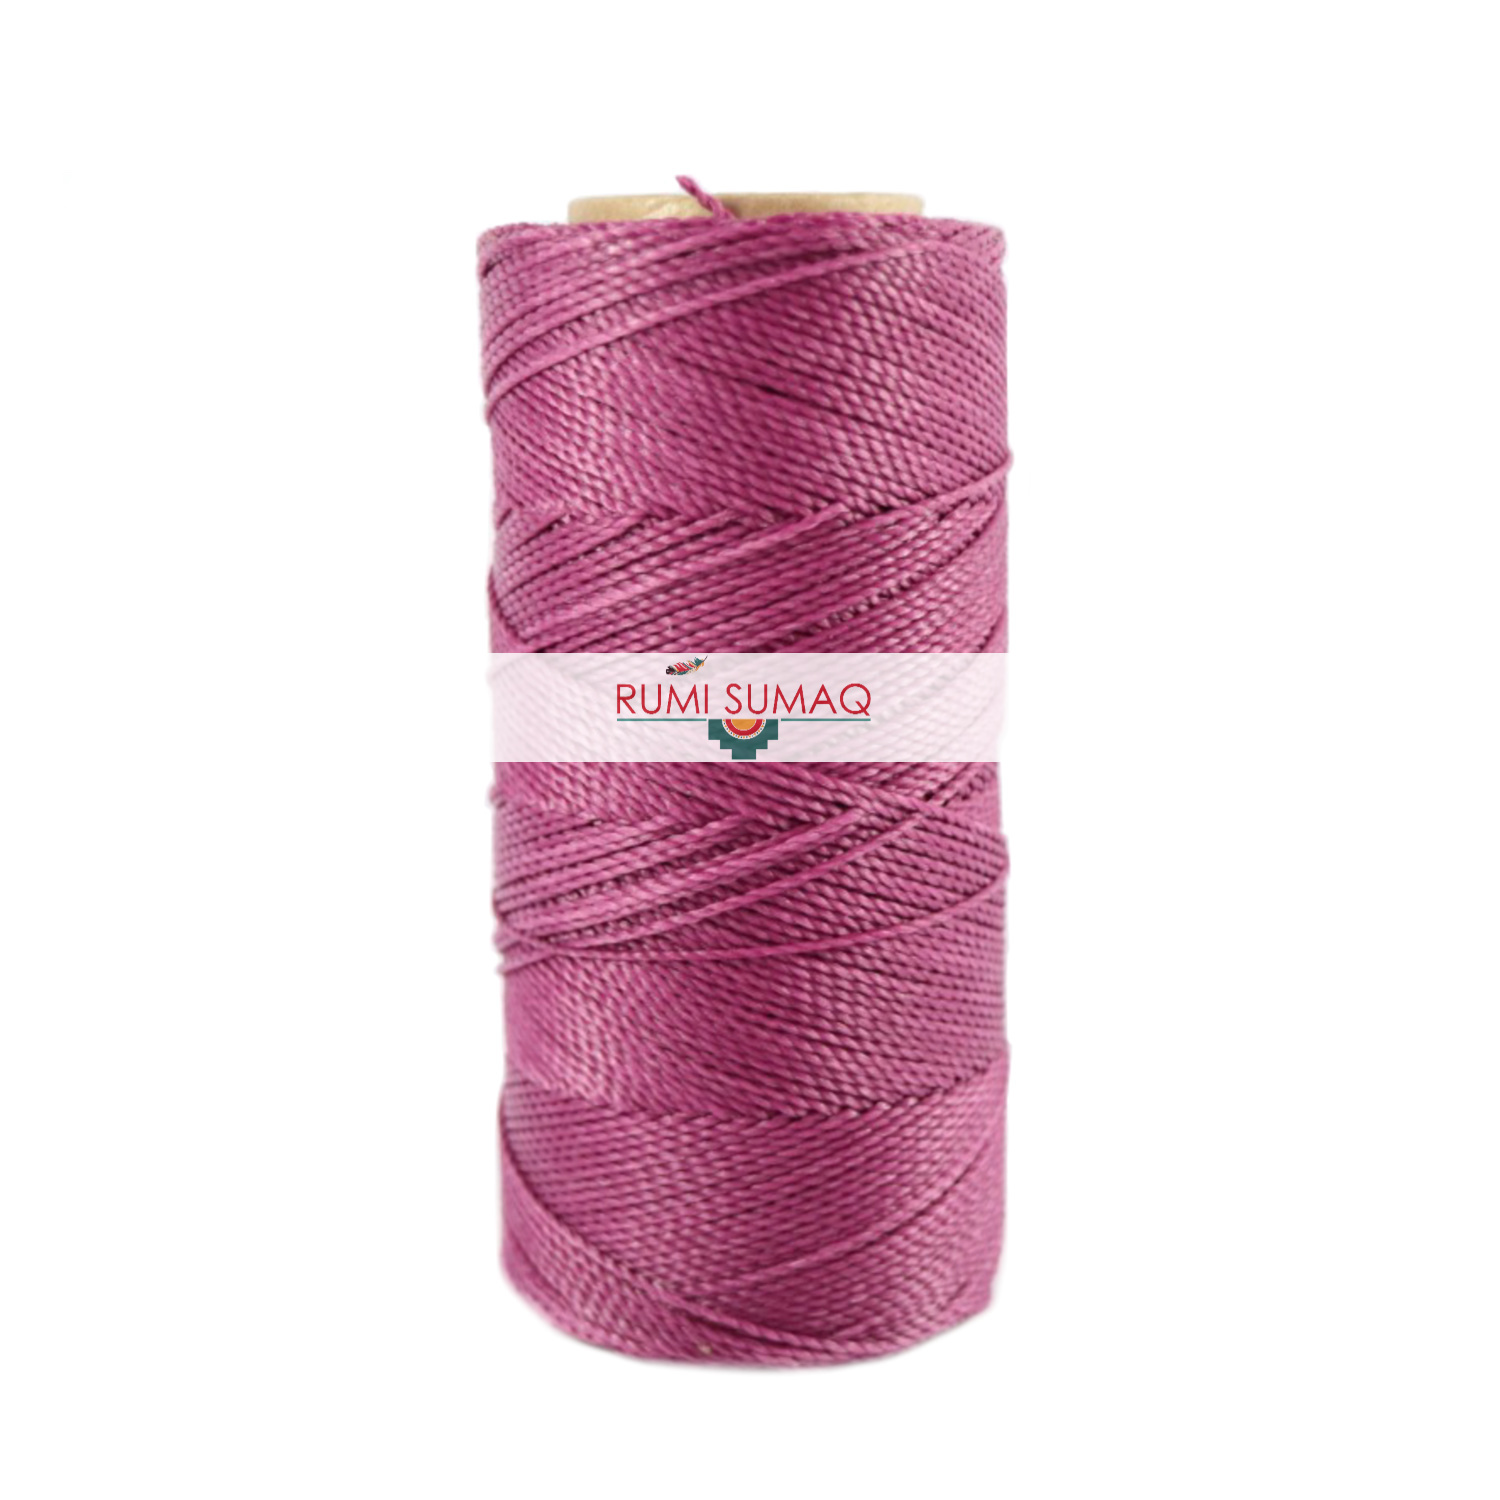 Find Linhasita 360 light orchid 1mm waxed polyester cord at RUMI SUMAQ, the premier retailer for waxed thread for knotting, beading, quilting and leather working